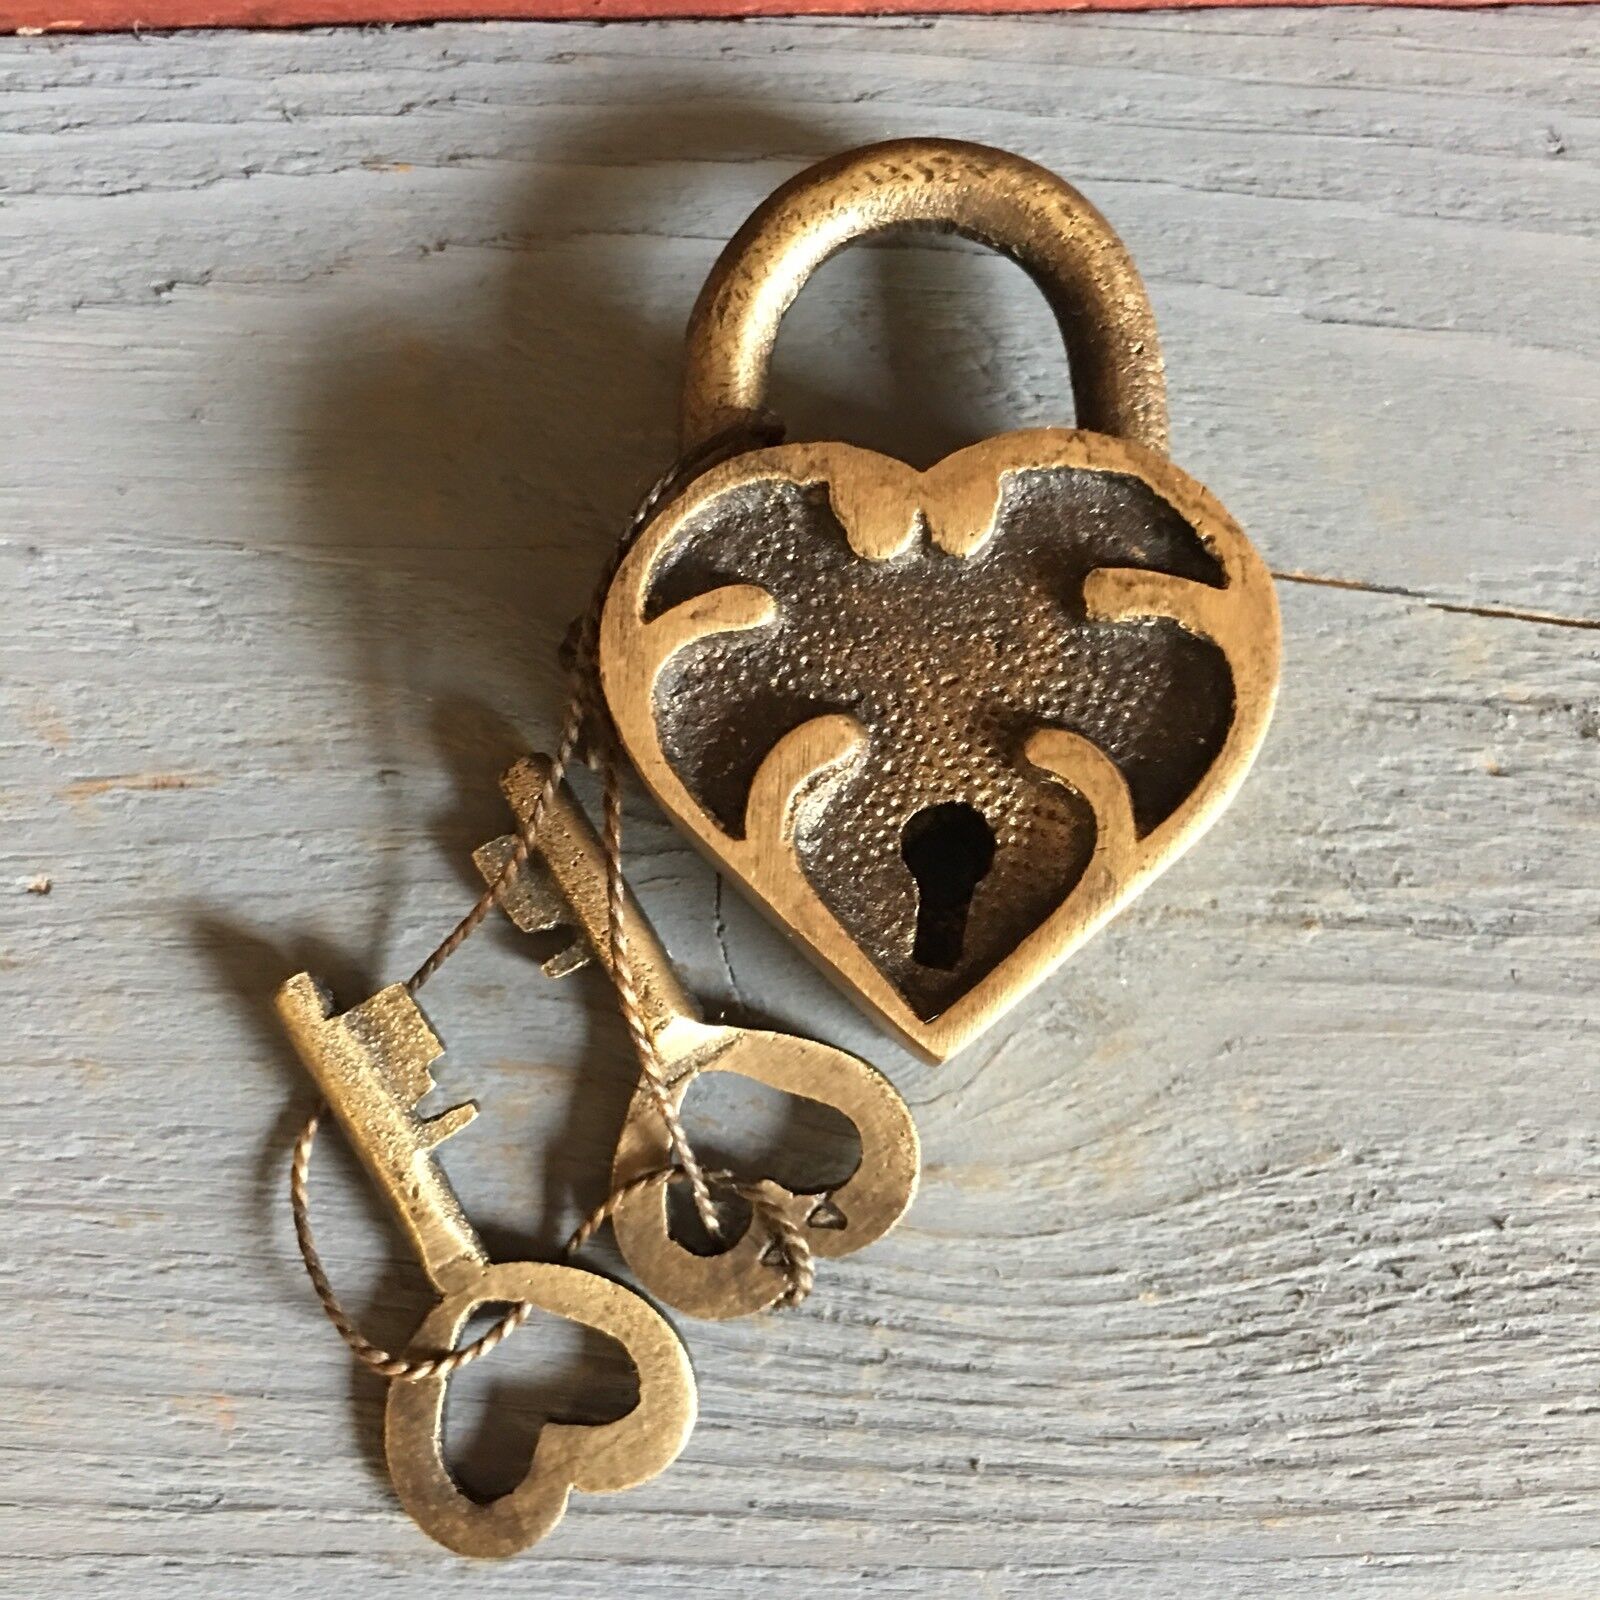 Ornate Heart Lock, Solid Brass With Antique Finish And Two Keys, 2” X 1.25”